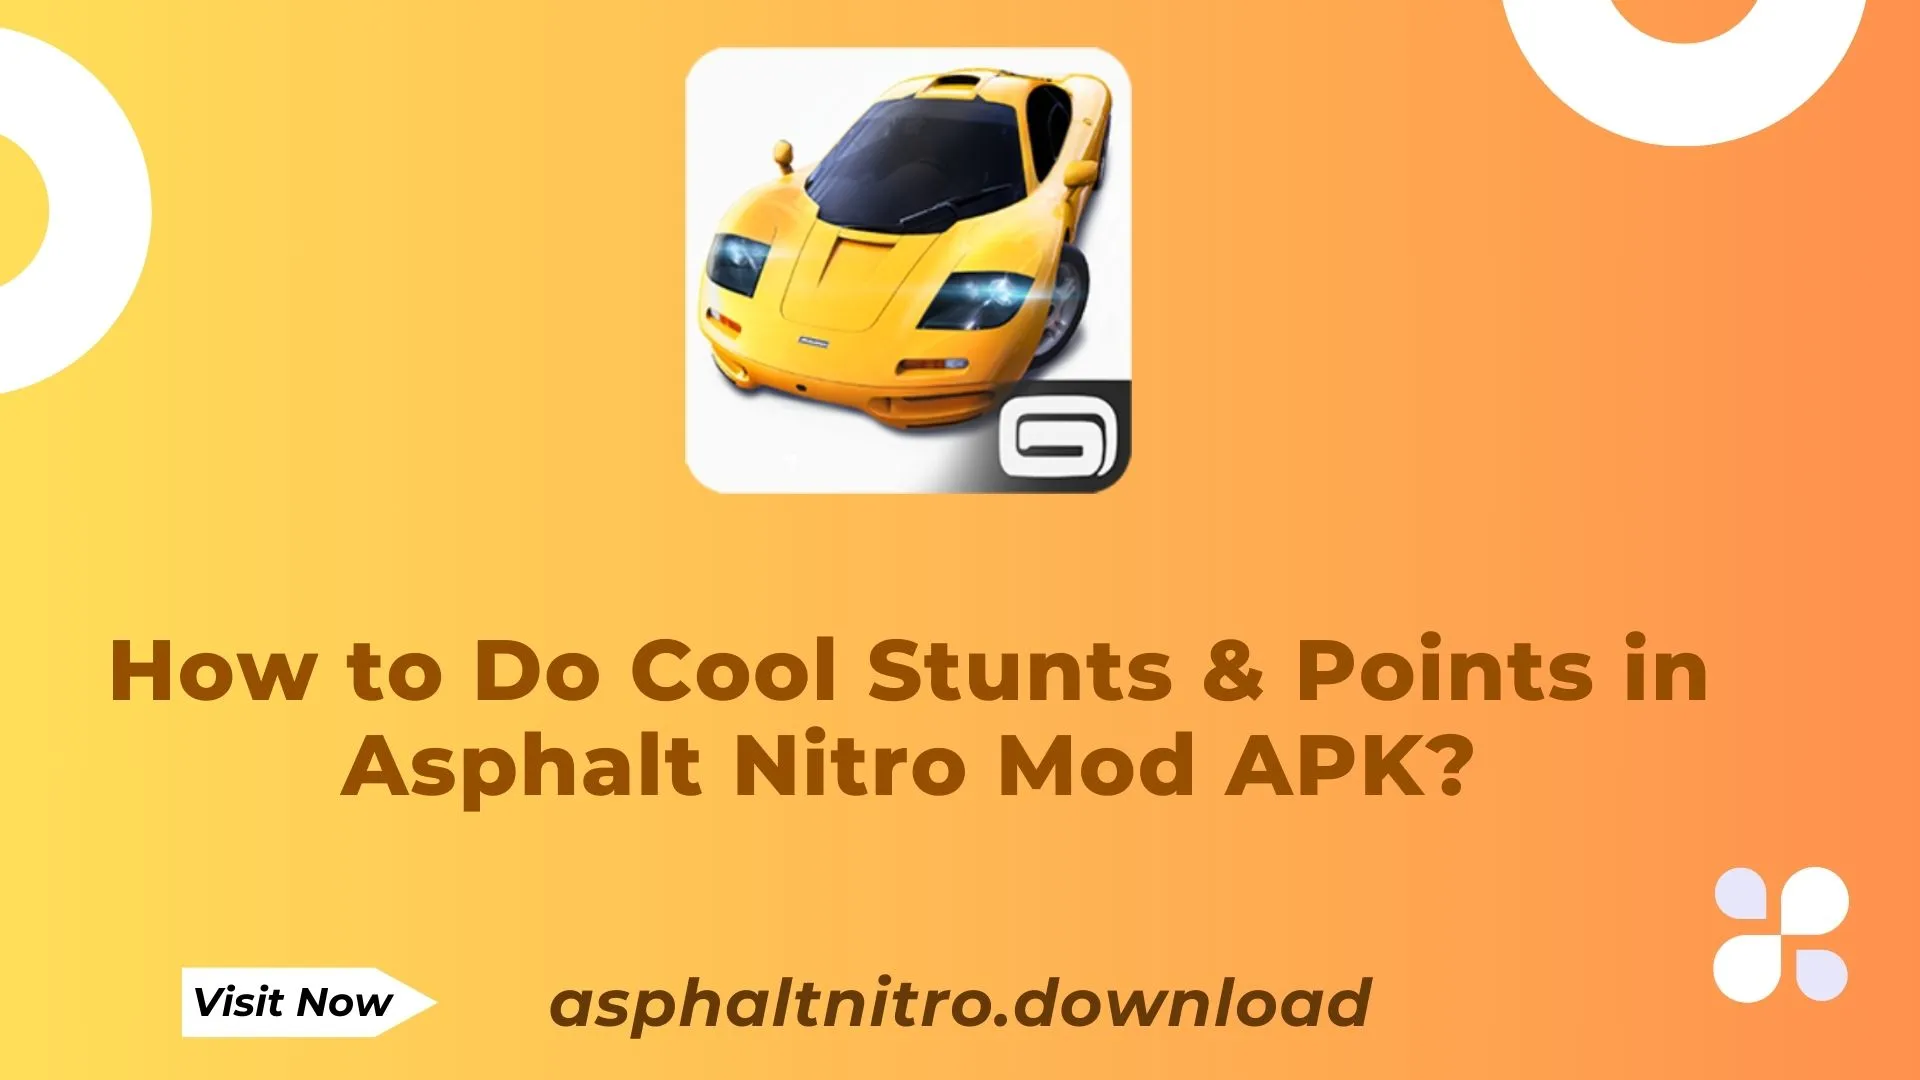 How to Do Cool Stunts and Get More Points in Asphalt Nitro Mod Apk?